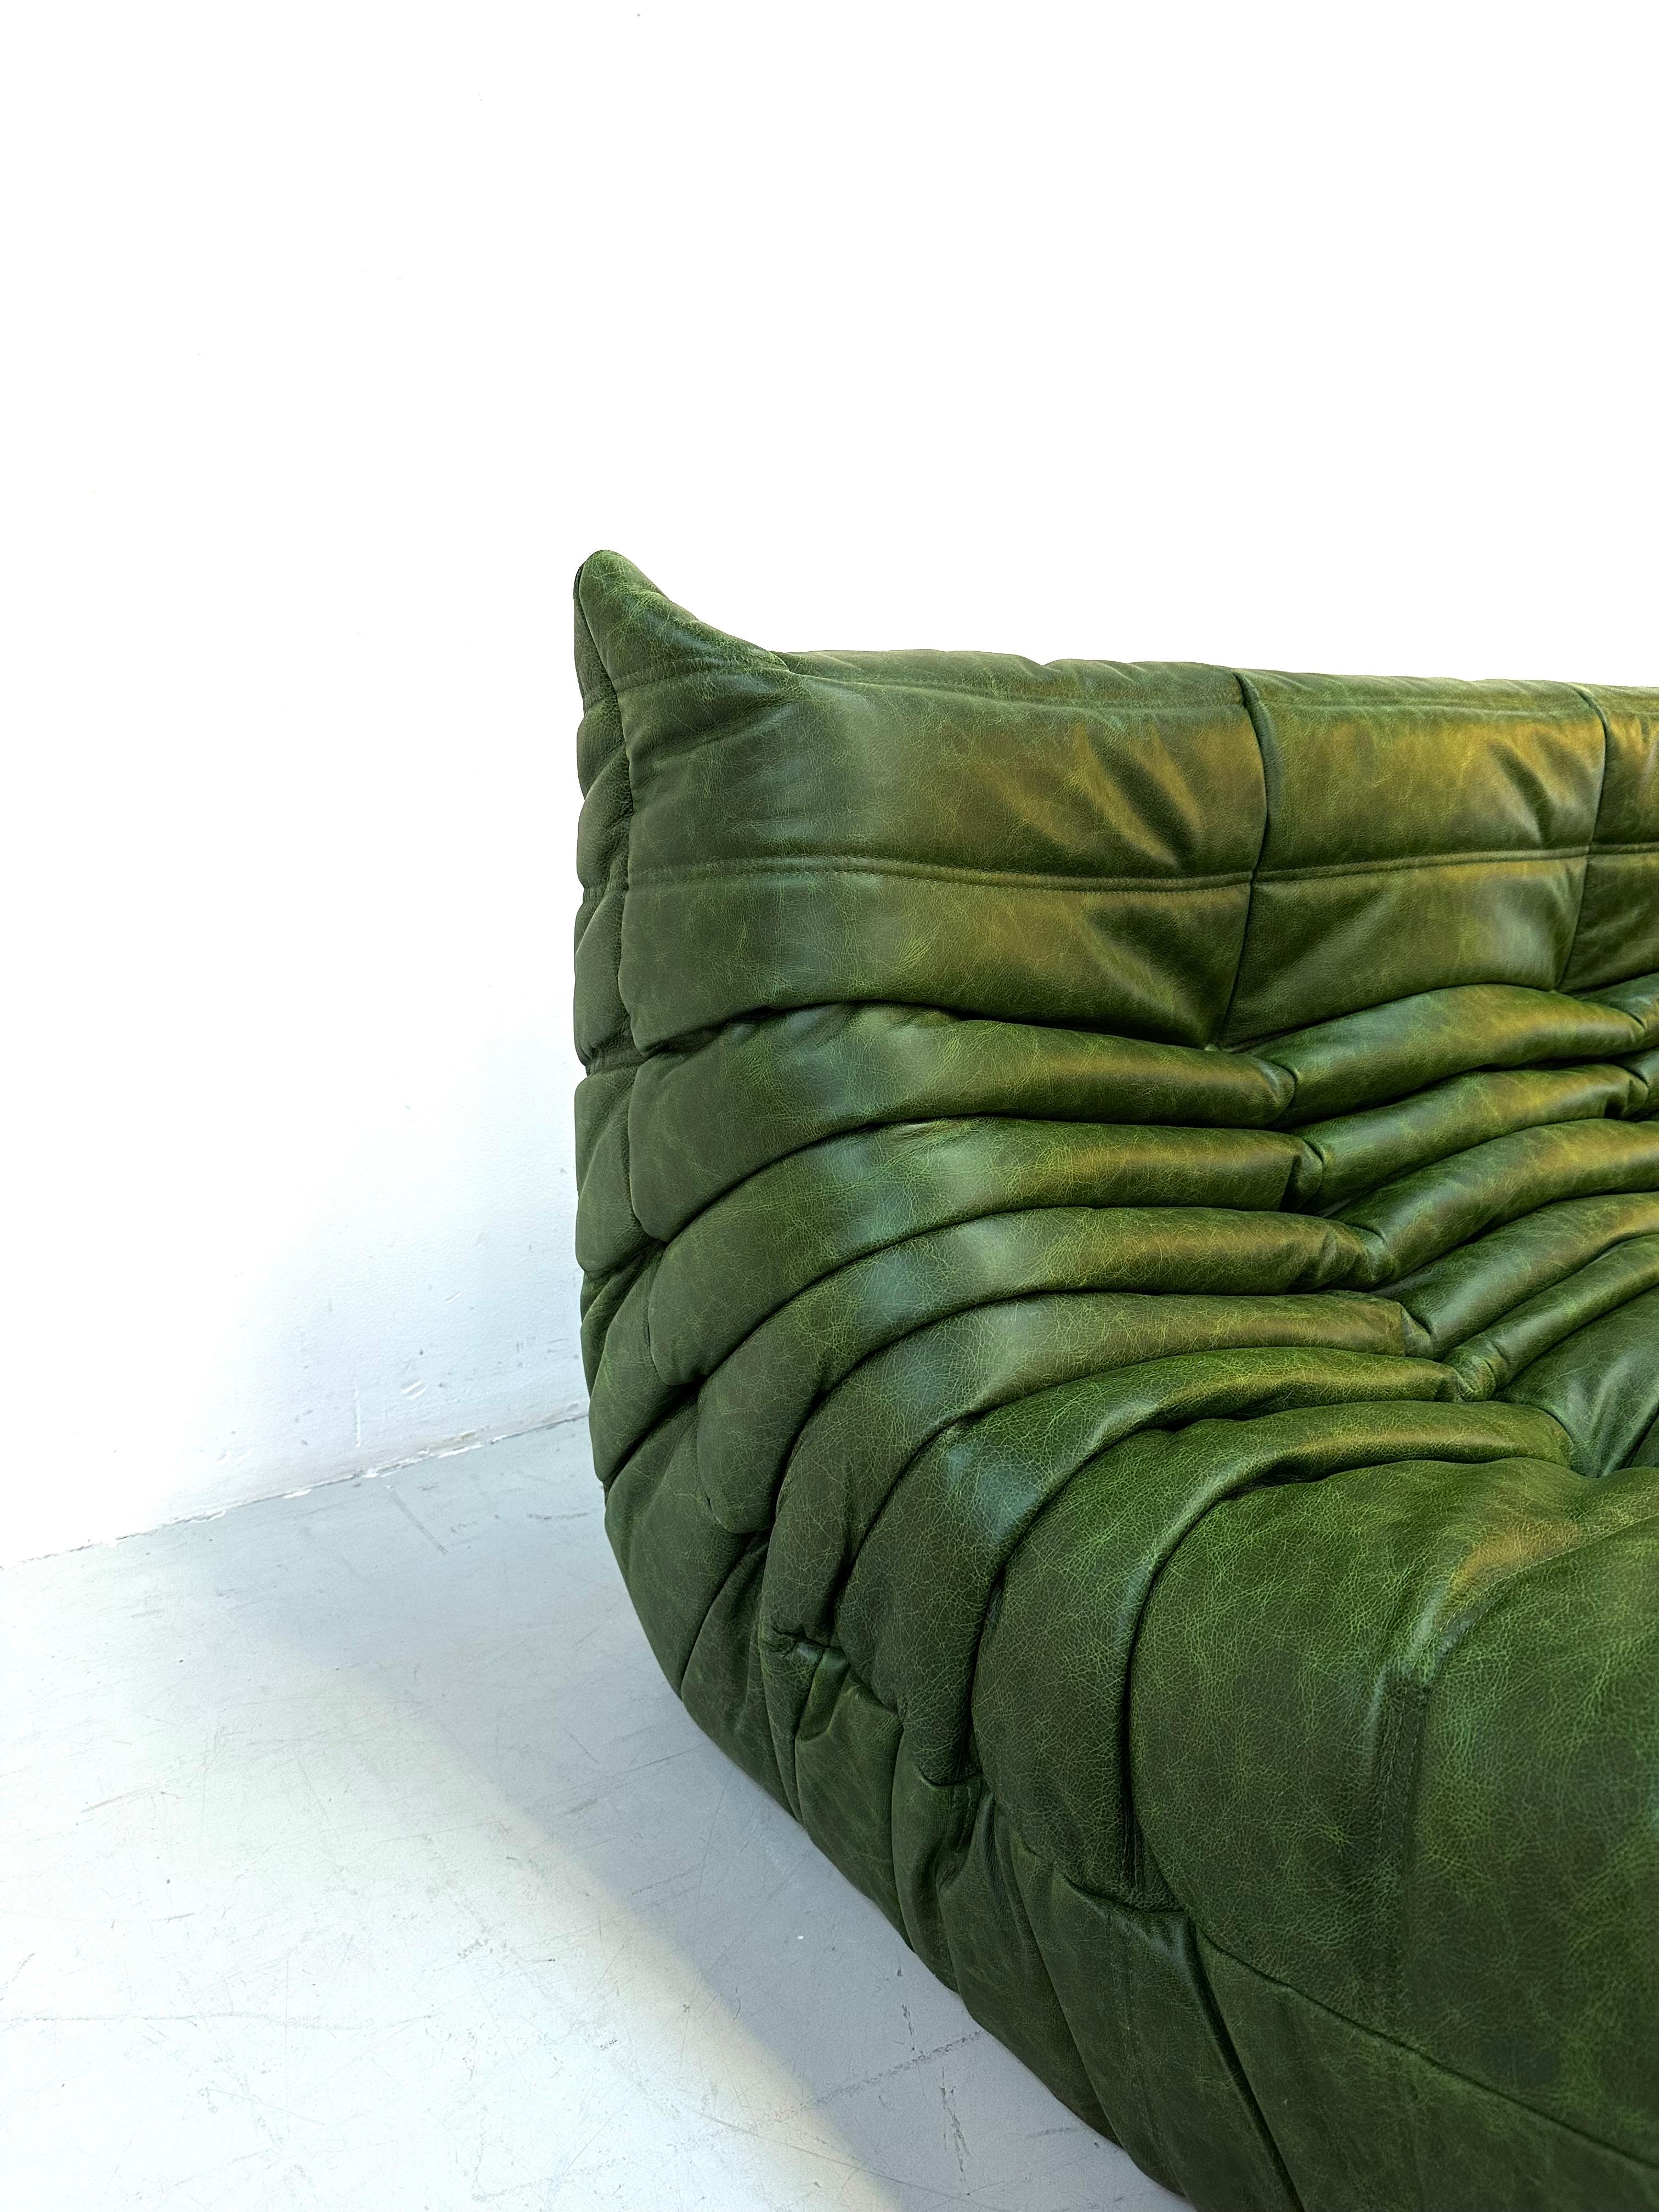 20th Century French Vintage Togo Sofa in Green  Leather by Michel Ducaroy for Ligne Roset.